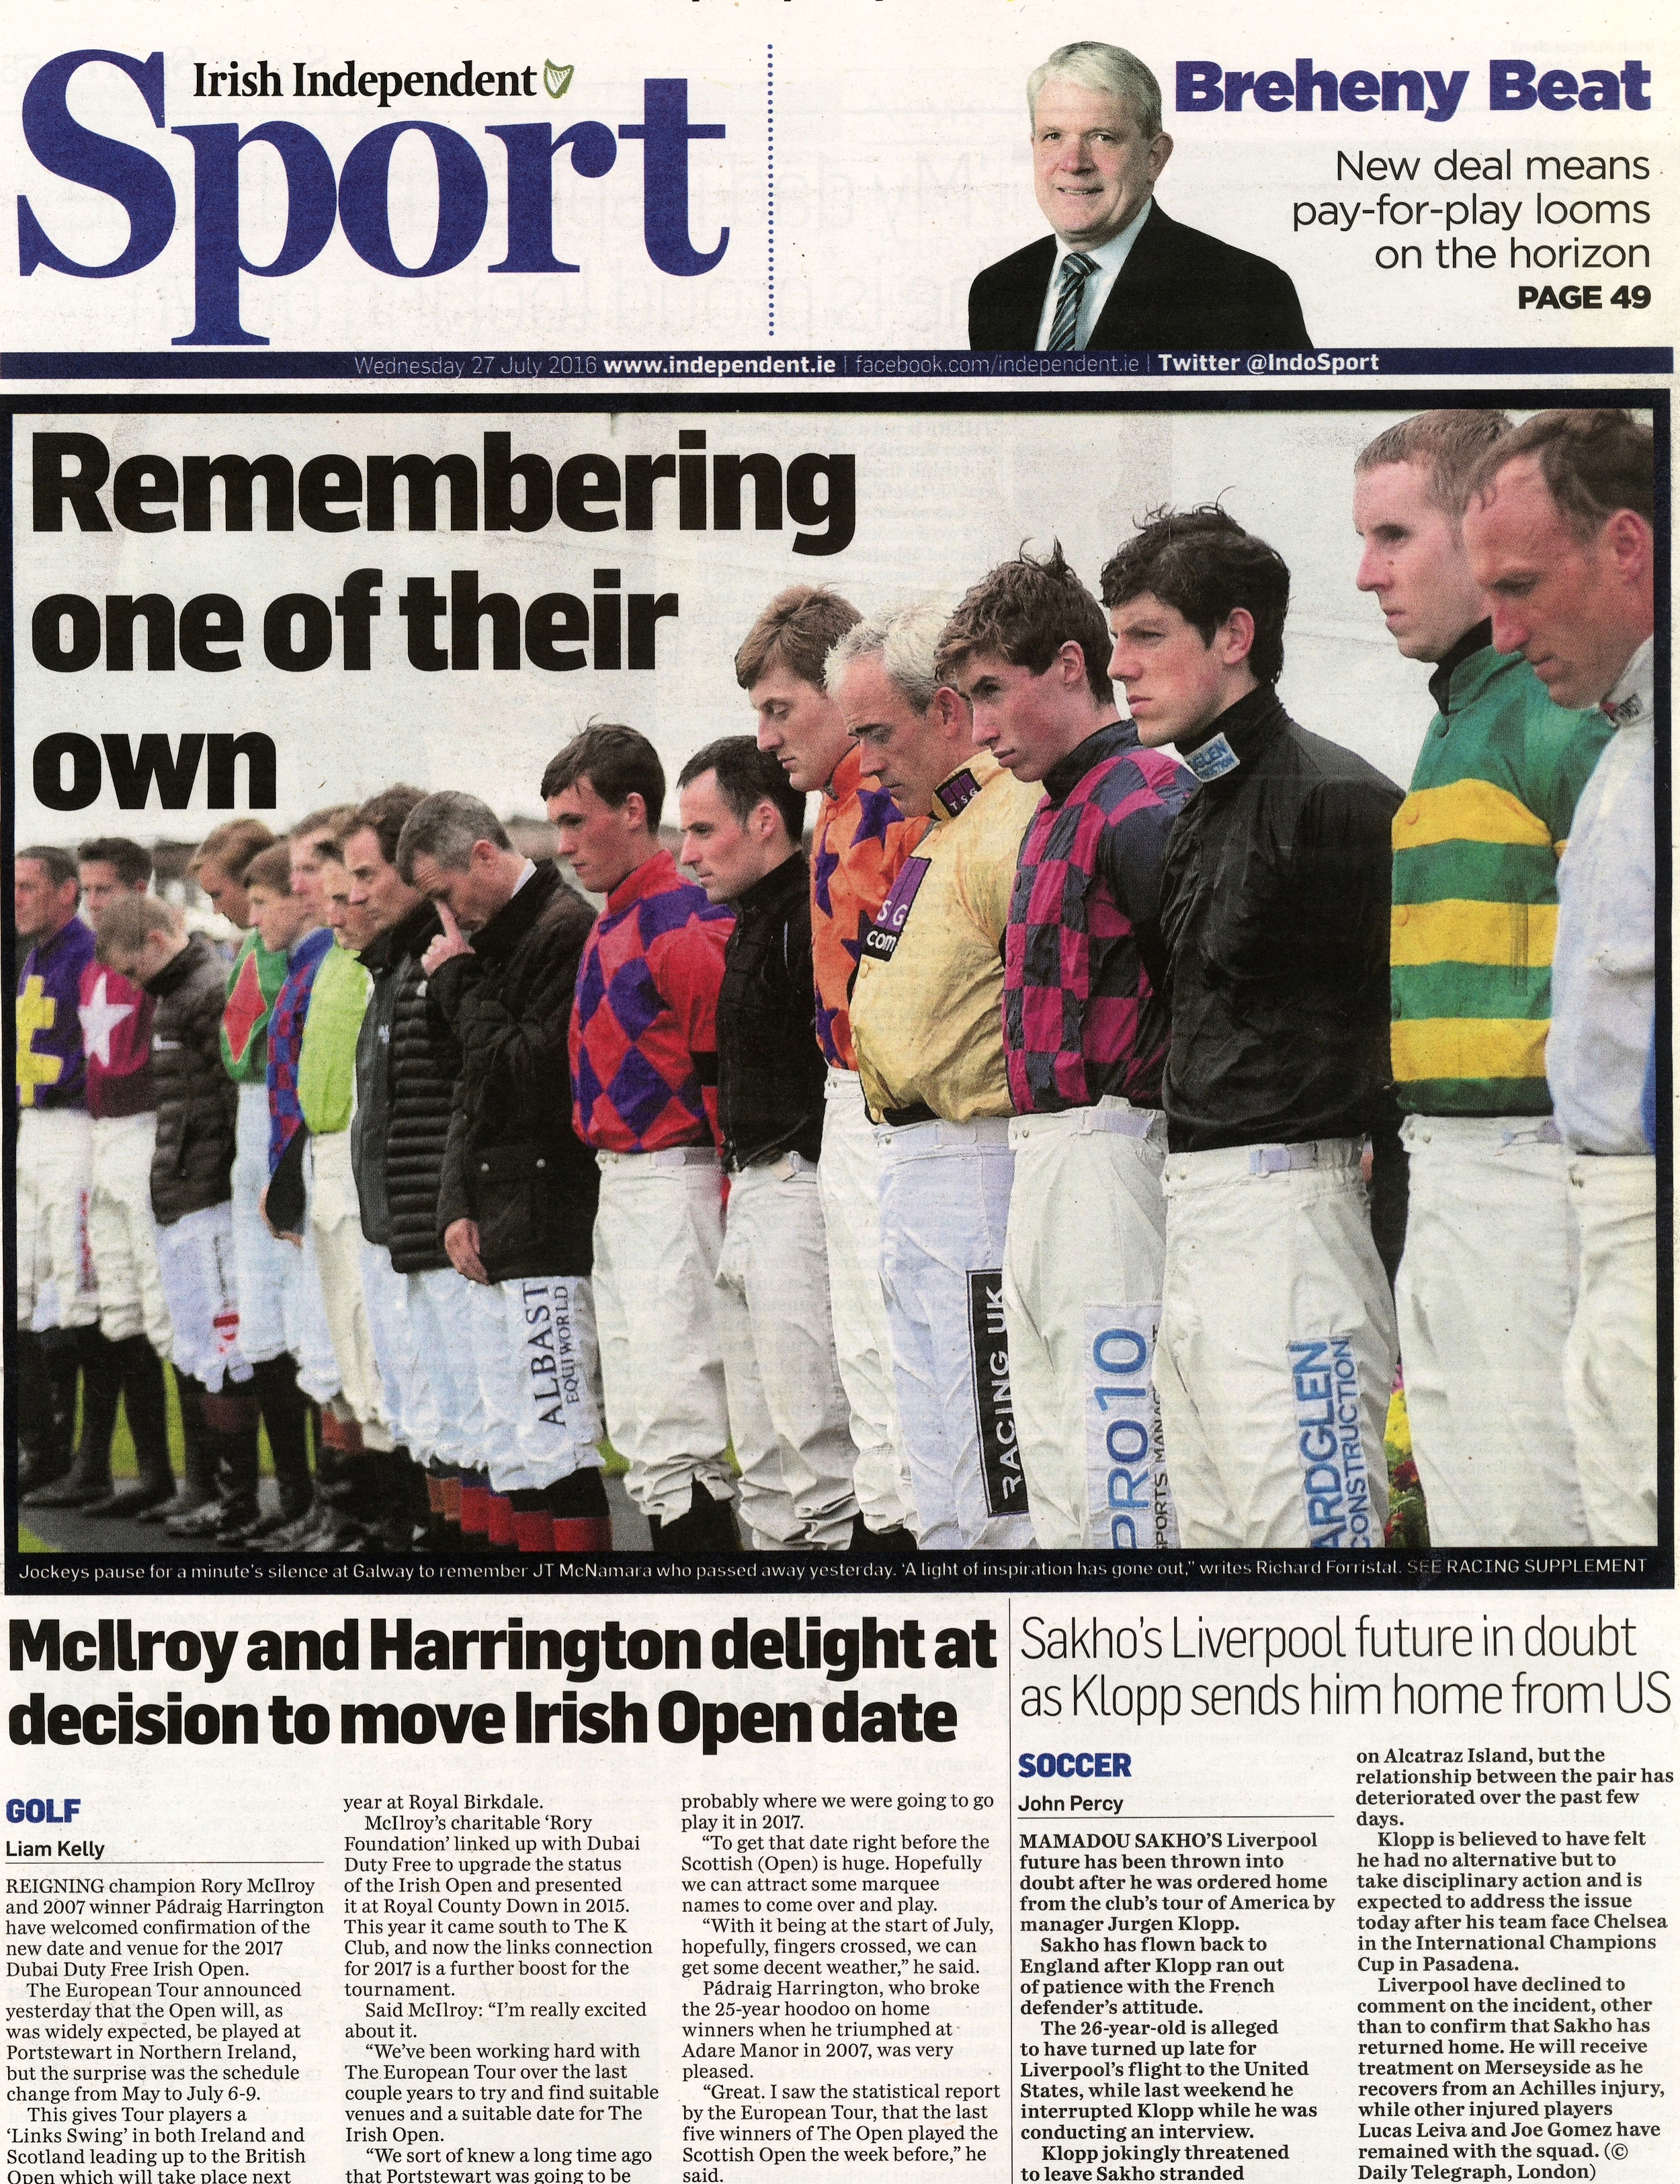  Jockeys during a minute of silence for late jockey JT McNamara during Galway Festival July 27 2016  Irish Independent  